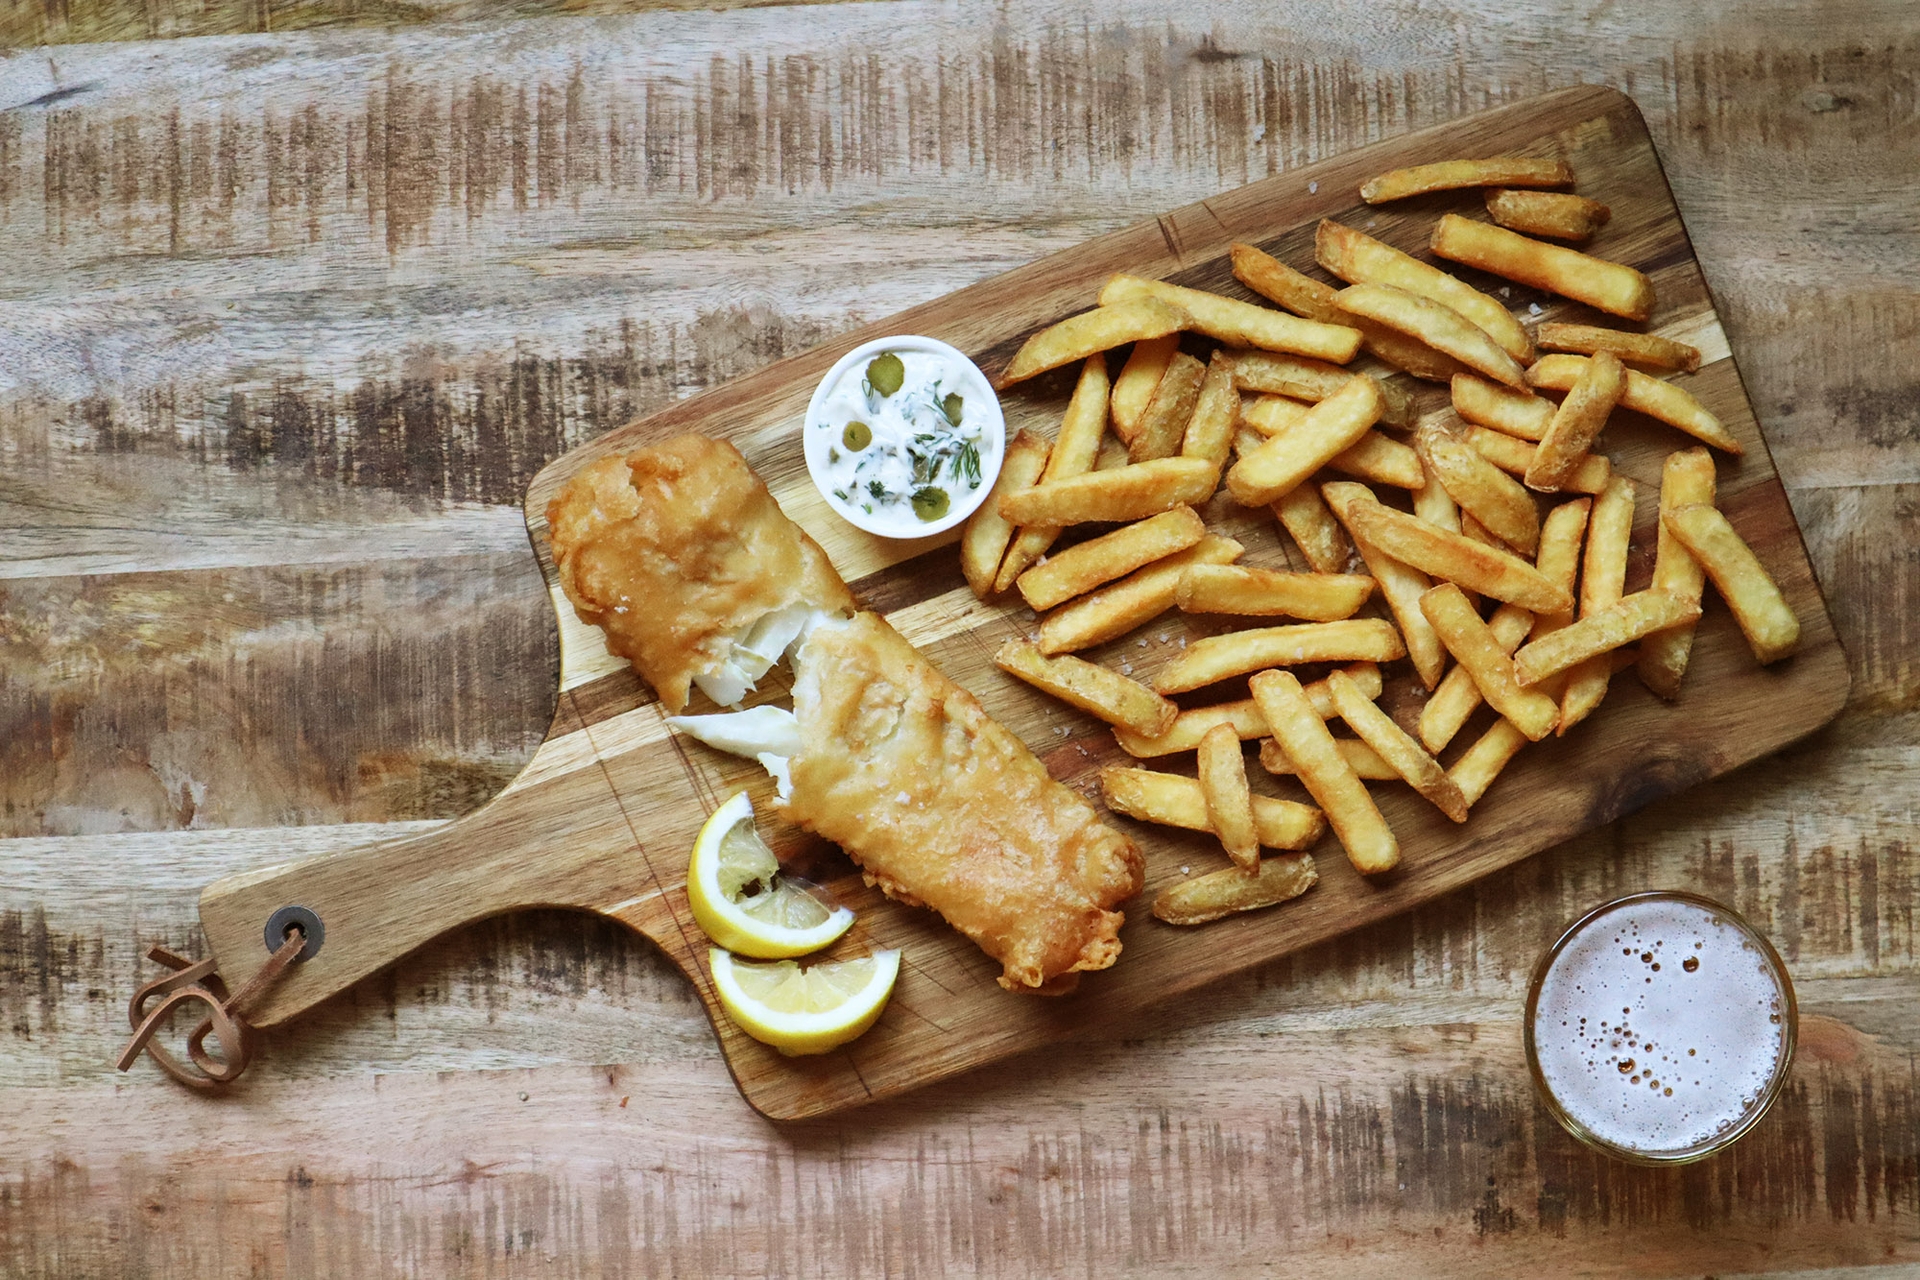 SuperCrunch Pure & Rustic Fish & Chips